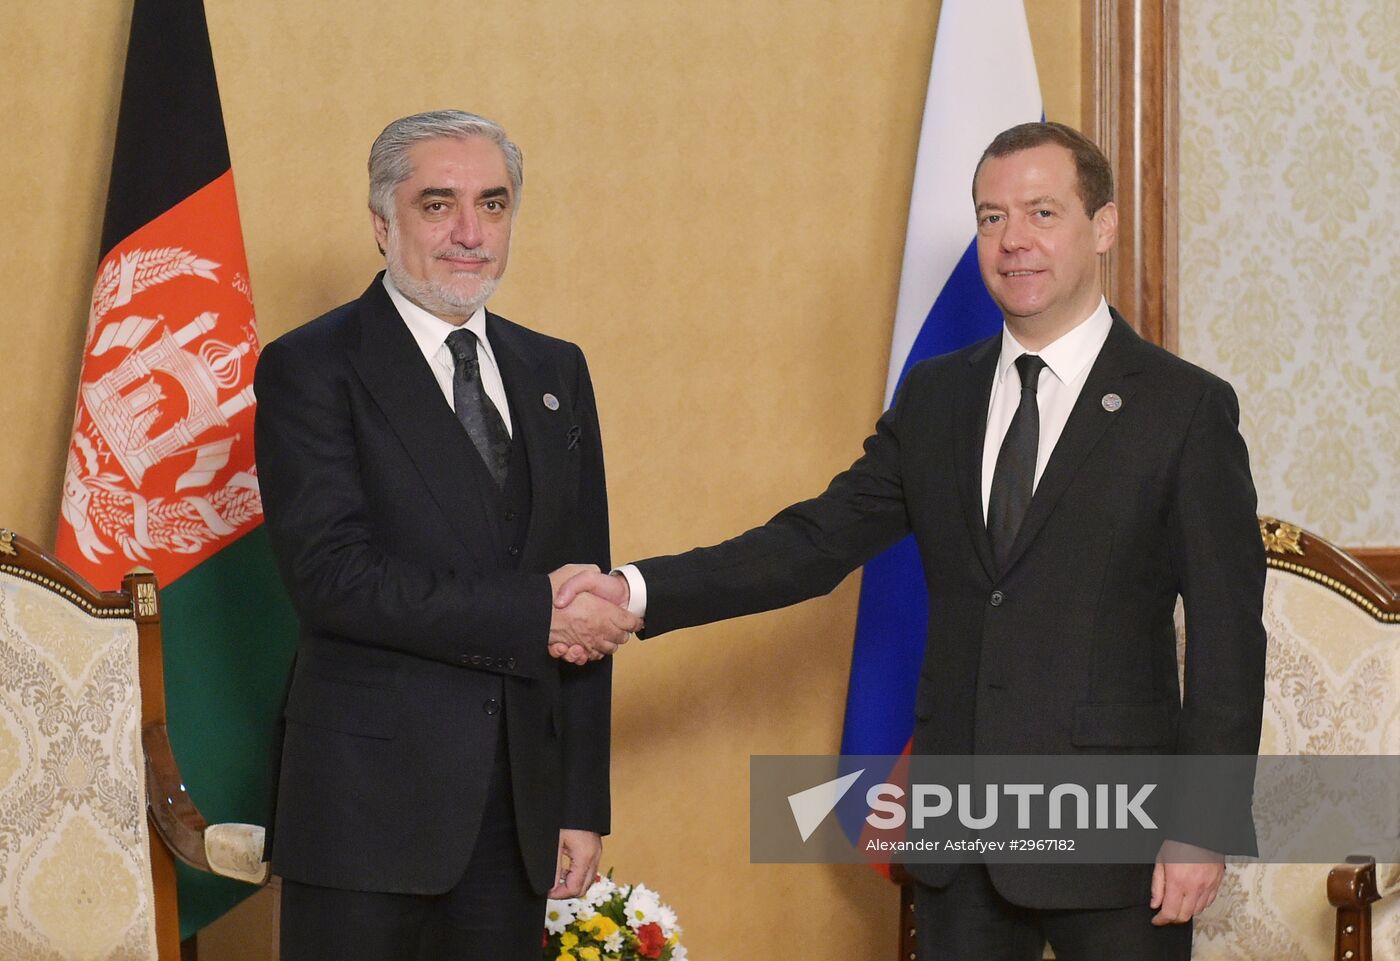 Russian Prime Minister Dmitry Medvedev's official visit to Kyrgyzstan